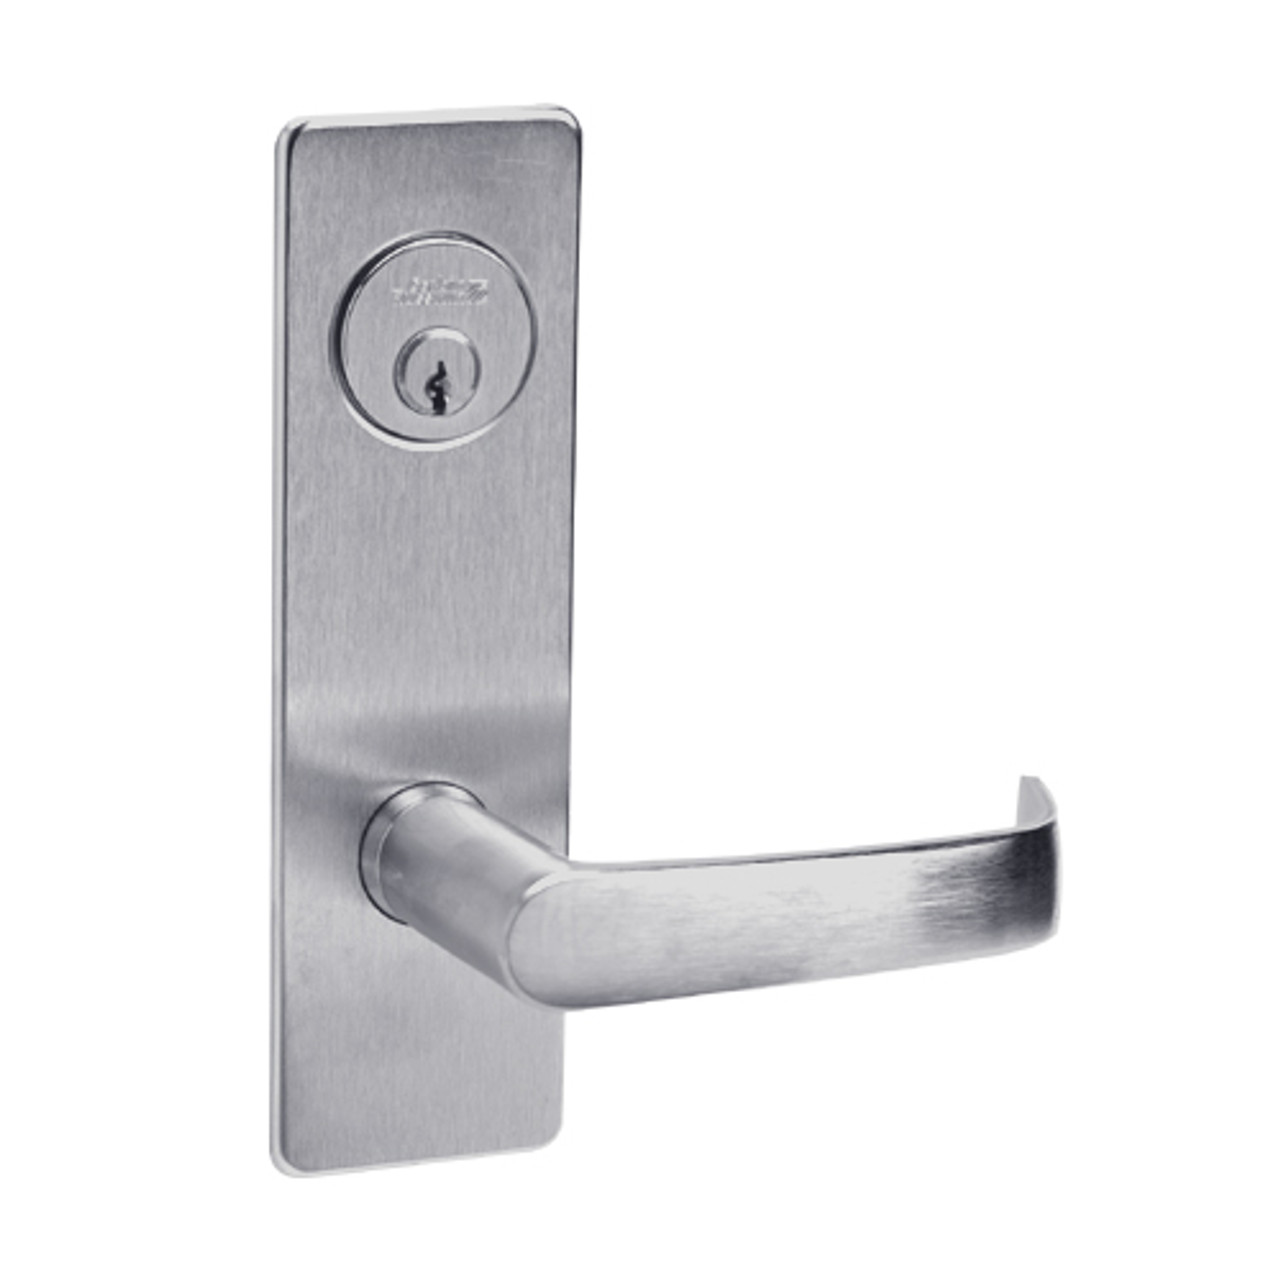 ML2059-NSP-626 Corbin Russwin ML2000 Series Mortise Security Storeroom Locksets with Newport Lever and Deadbolt in Satin Chrome